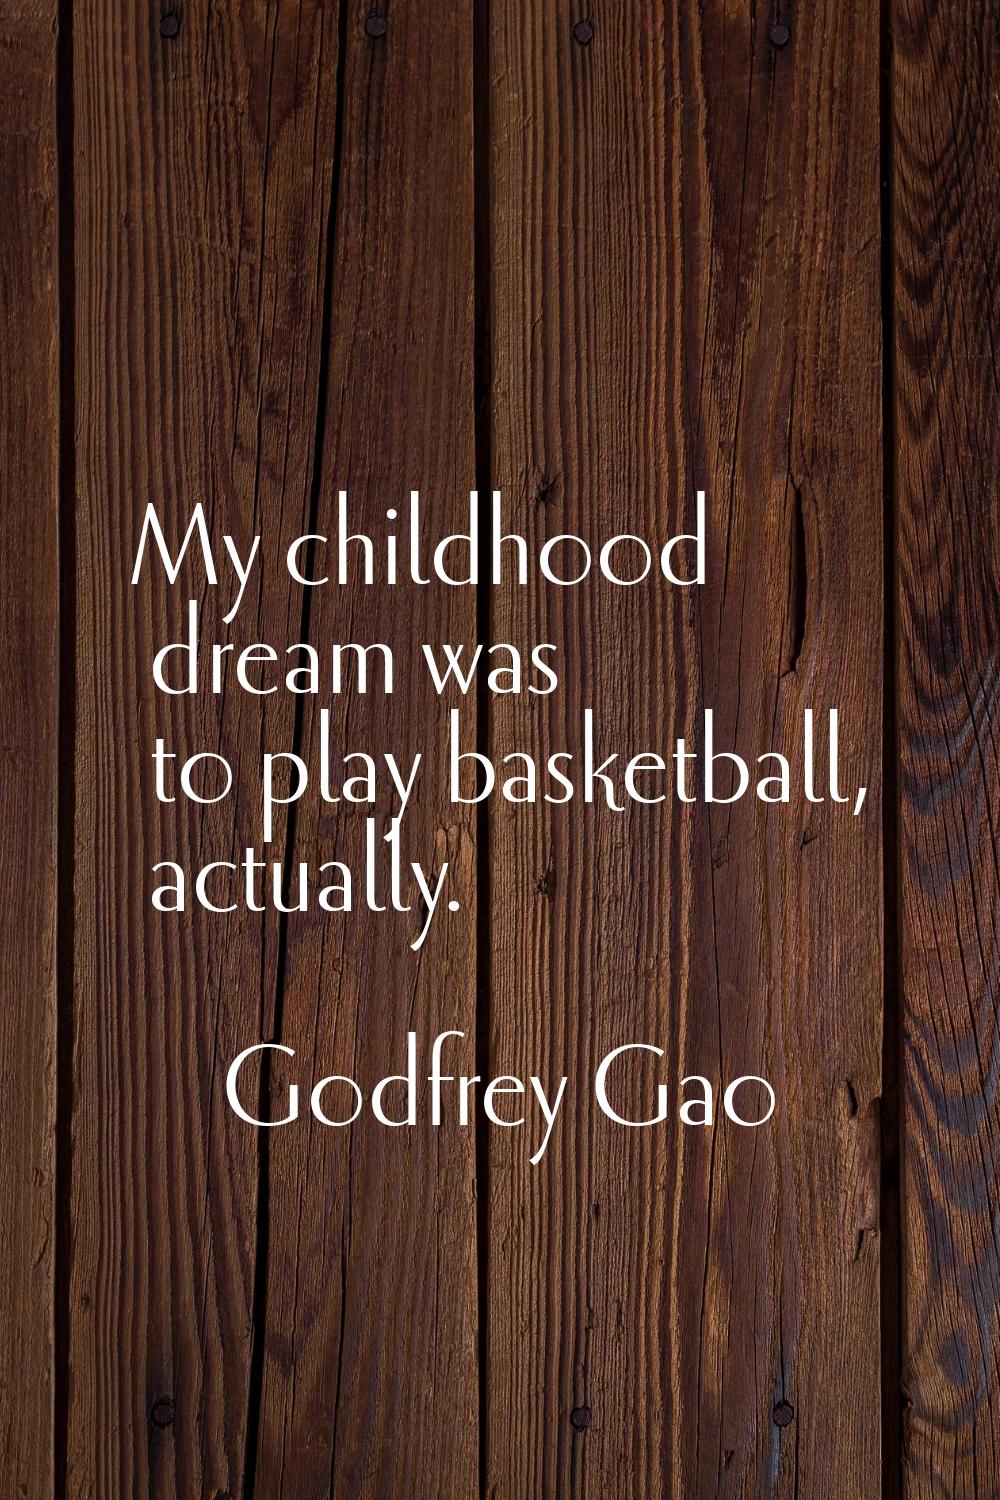 My childhood dream was to play basketball, actually.